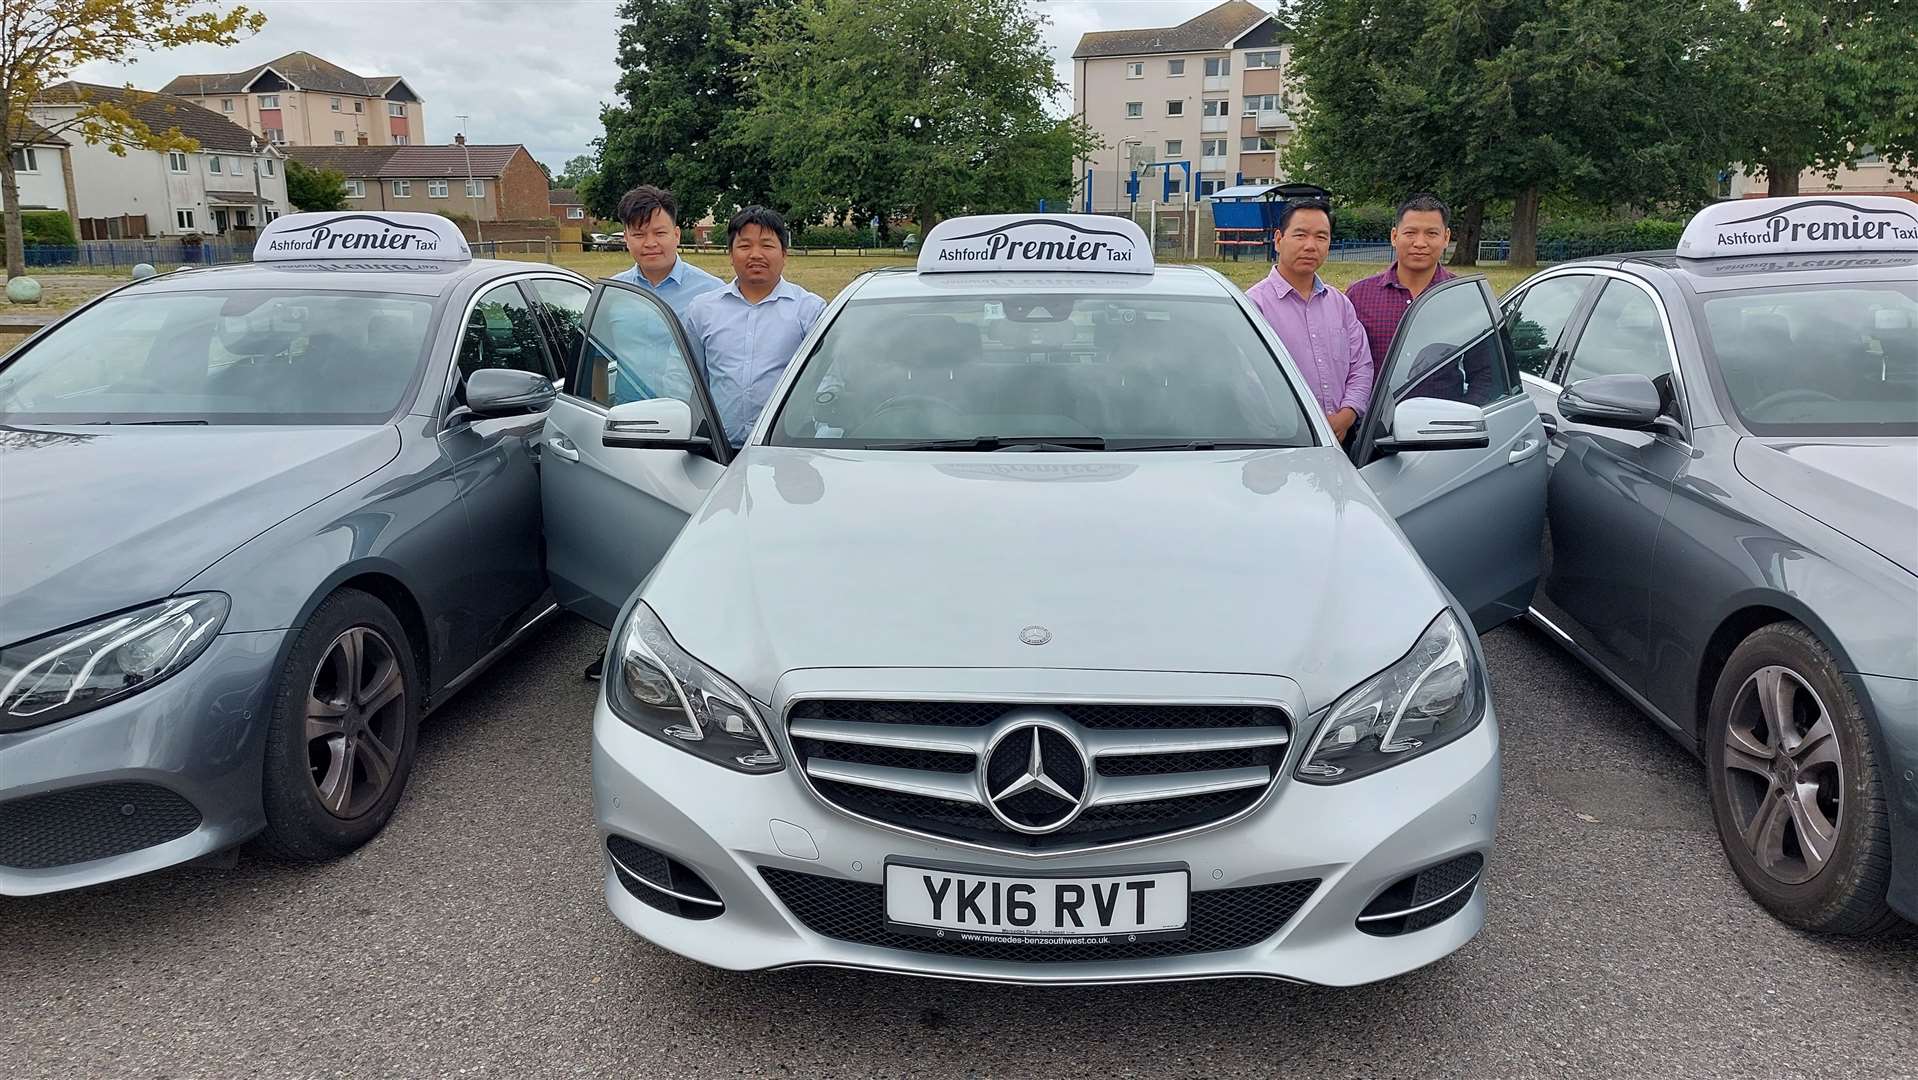 Ashford Premier Taxi launches today, using Mercedes cars